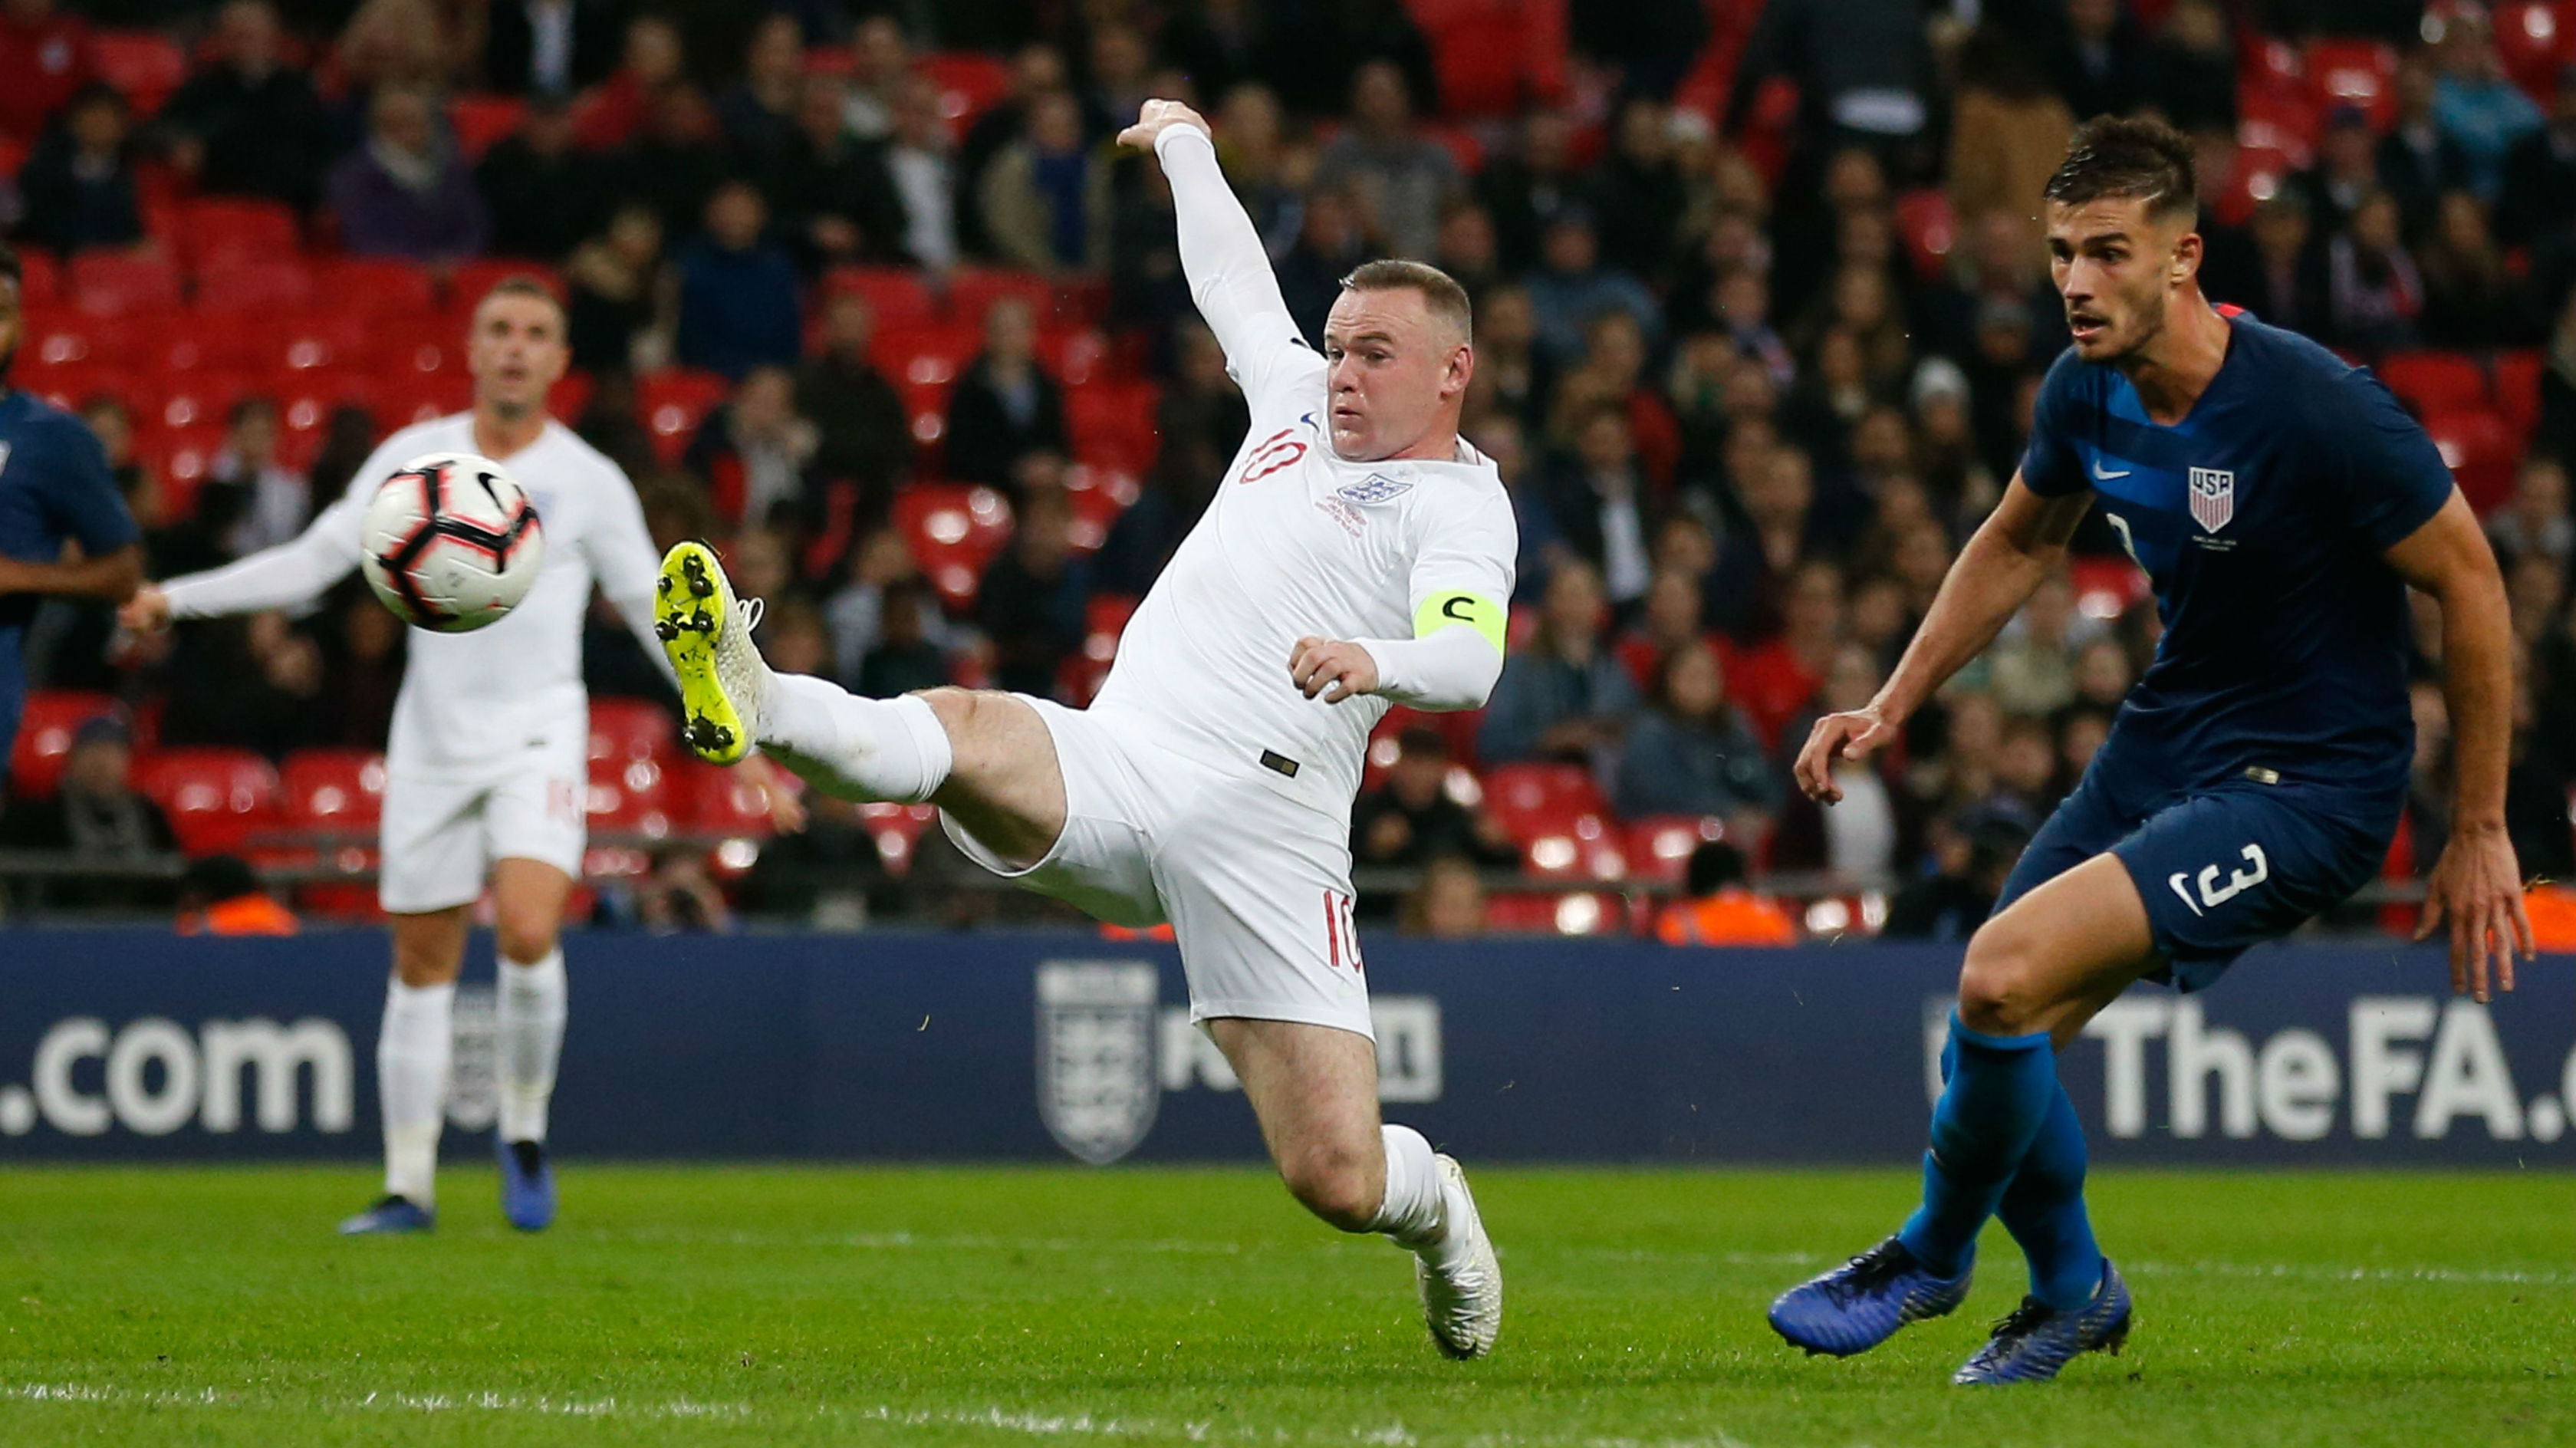 Wayne Rooney in his final game for England